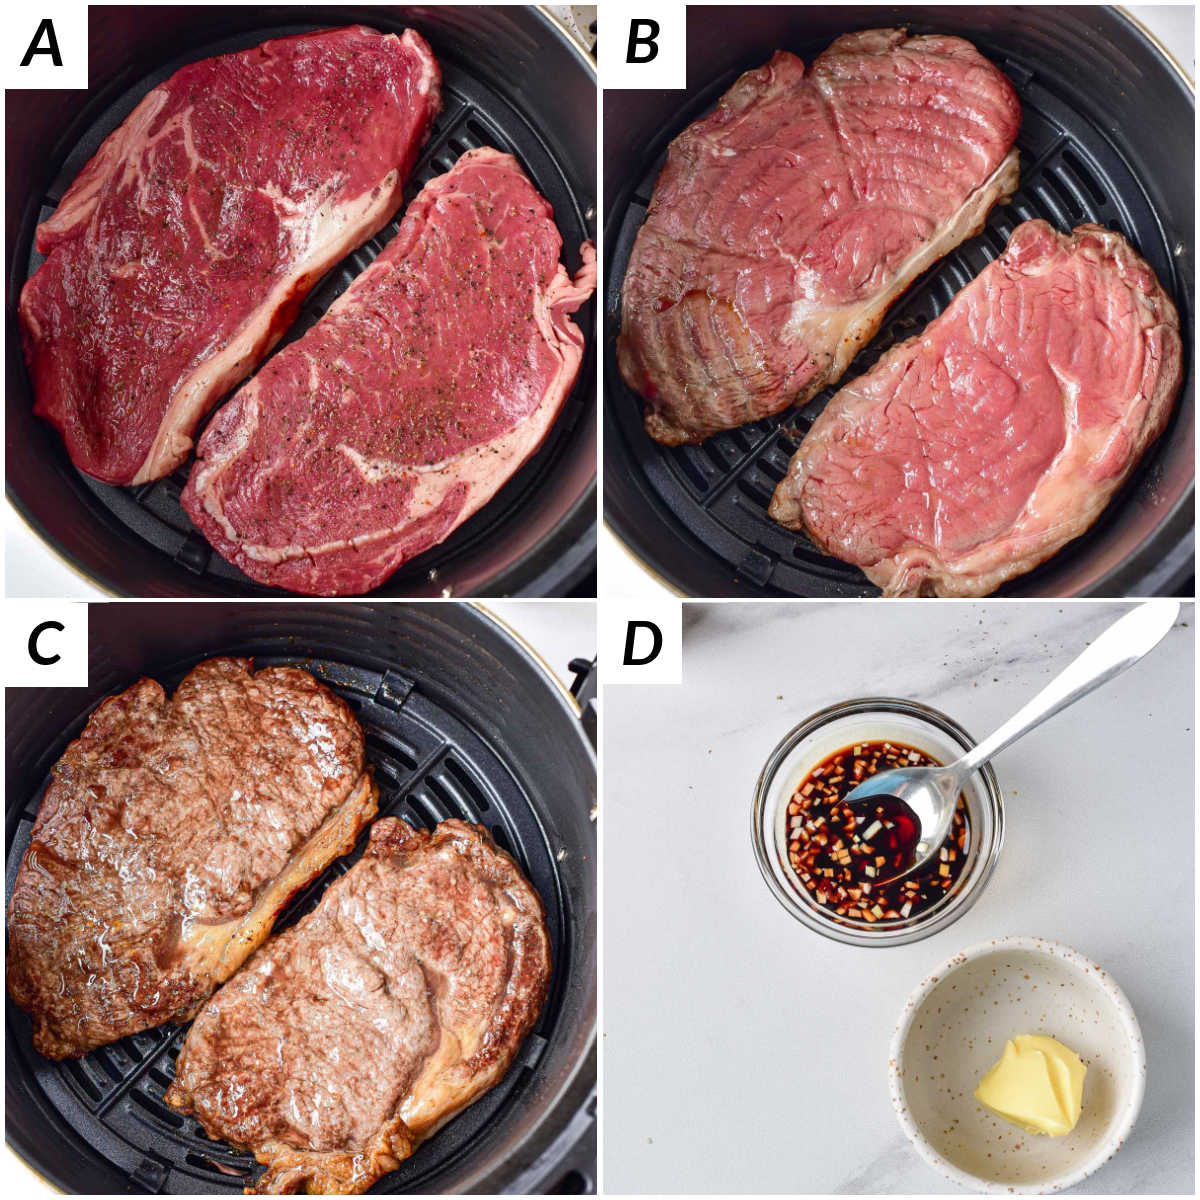 image collage showing the steps for making air fryer steak